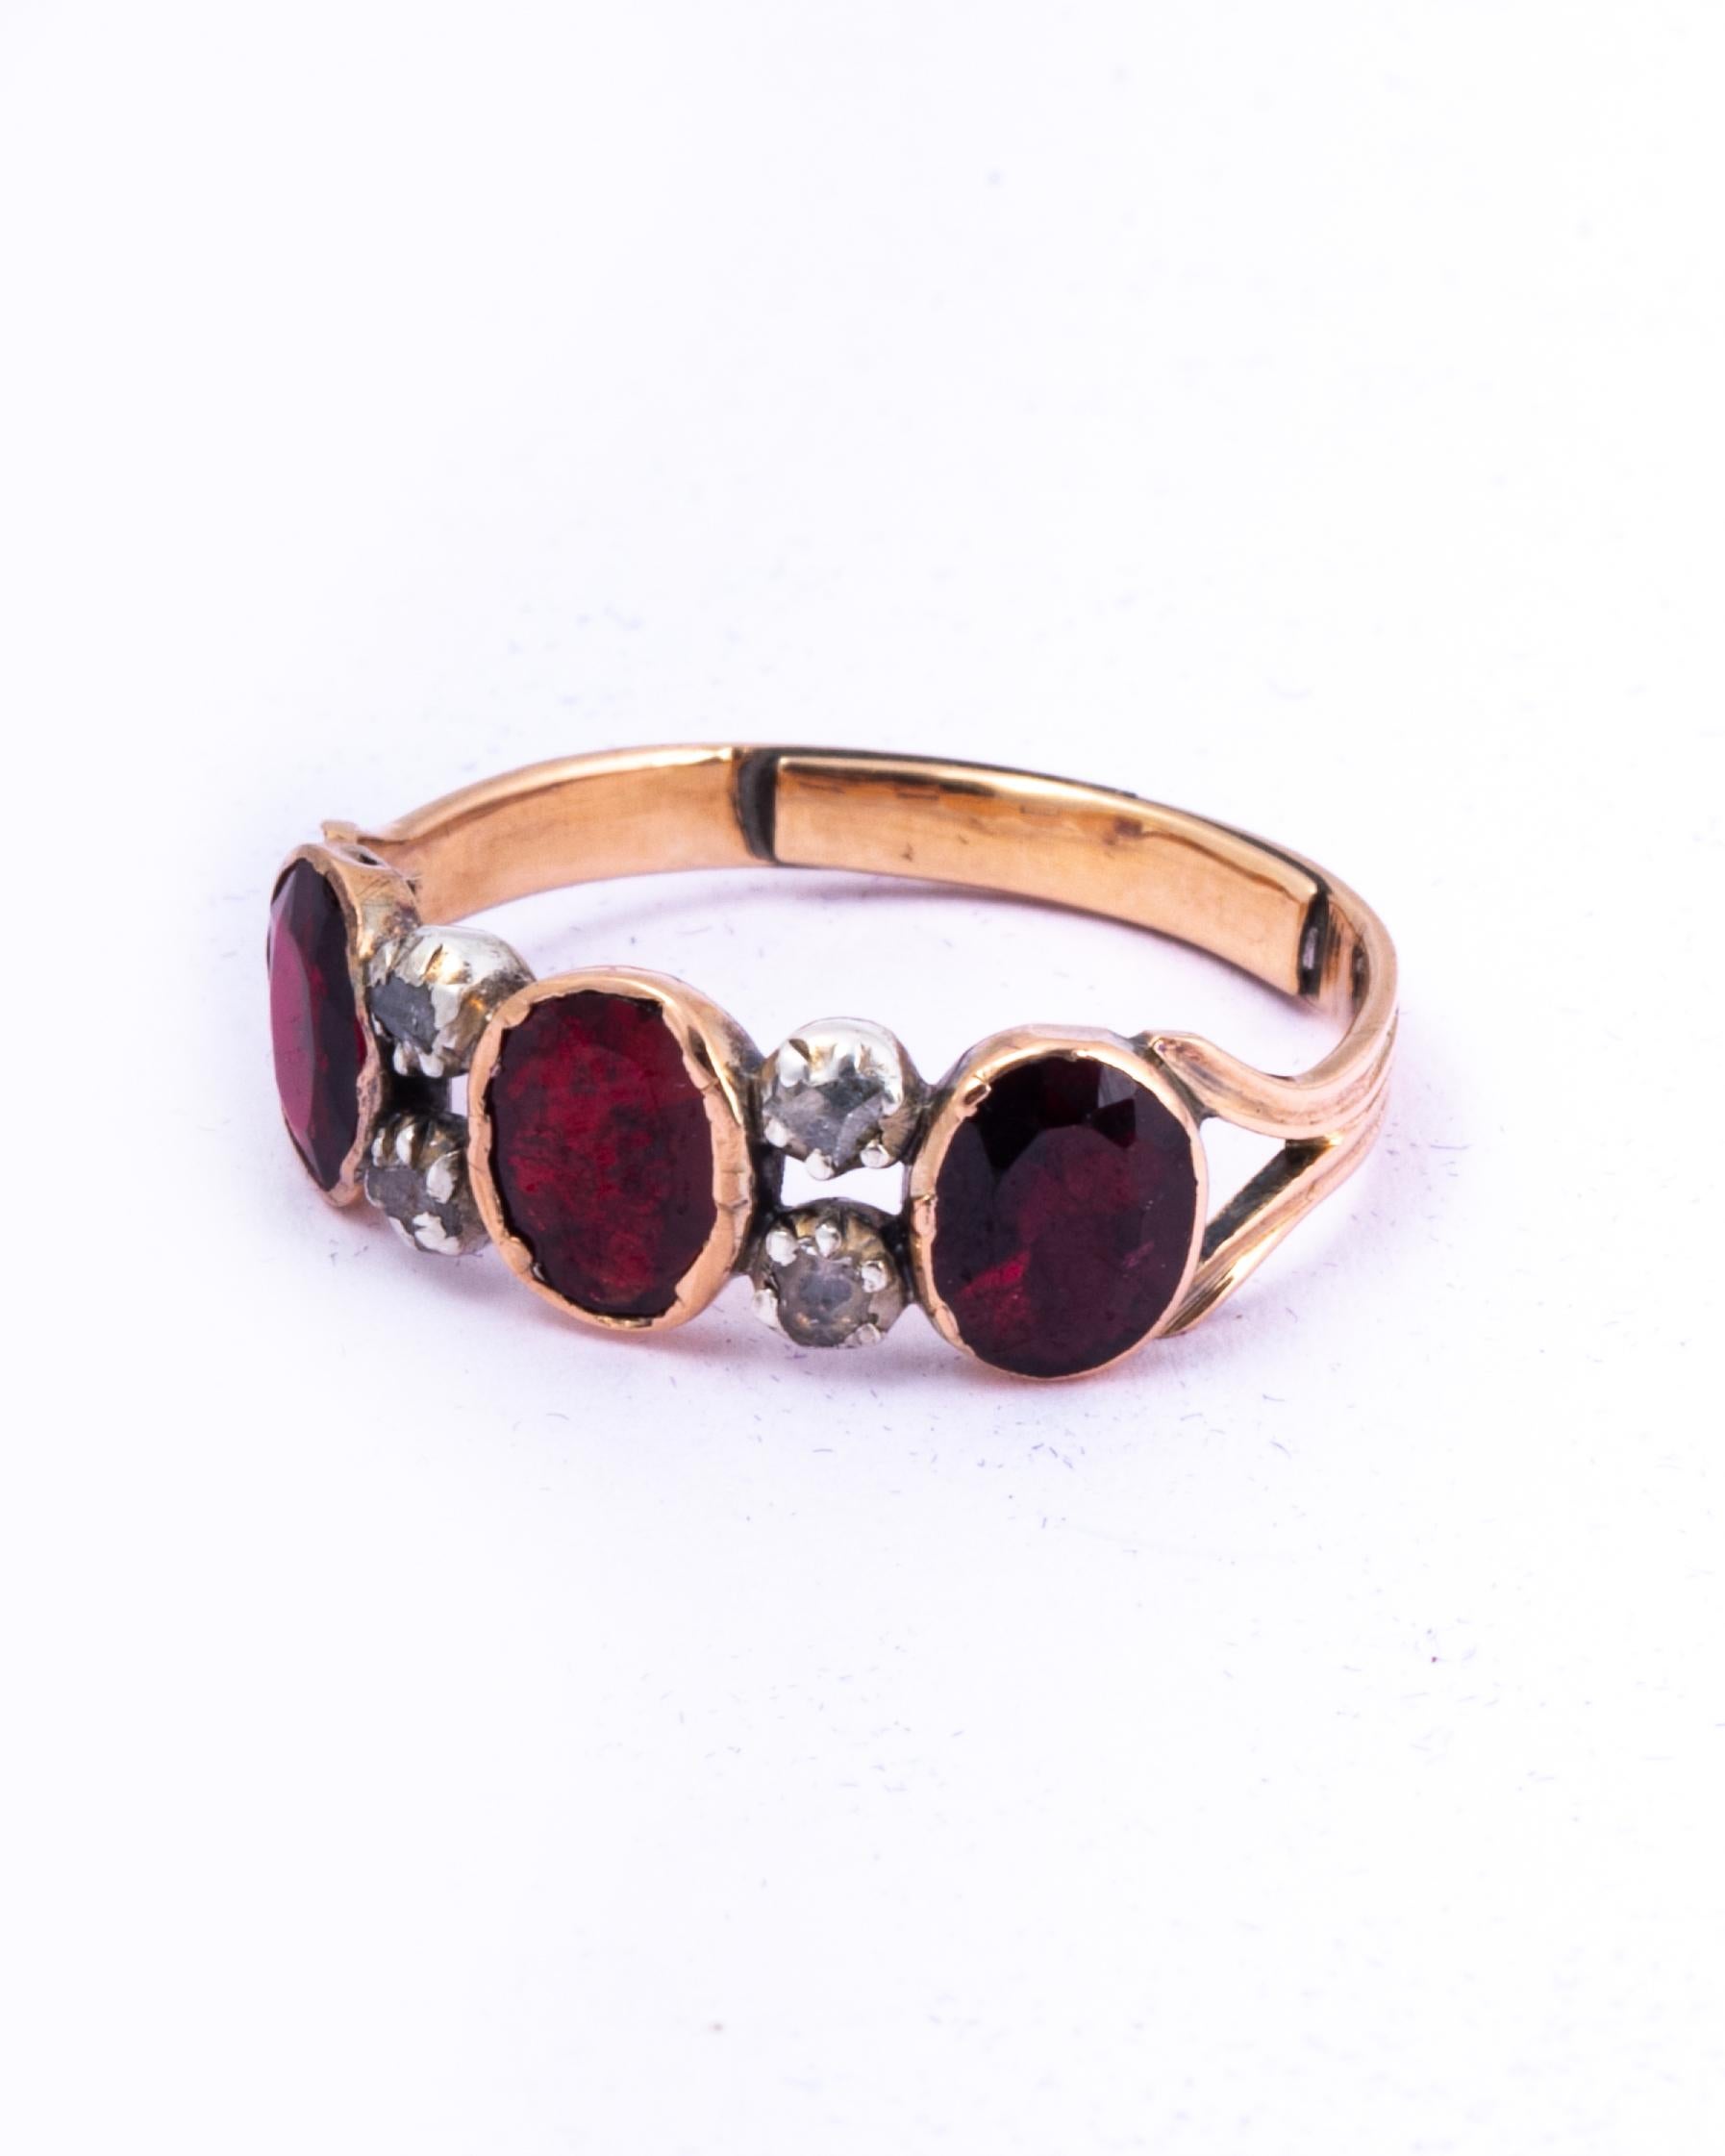 The gorgeous georgian flat cut garnets in this band are a wonderful large size. When wearing the band it has a lovely chunky look to it with the added sparkle of the pairs of rose cut diamonds between the red stones.

Ring Size: J or 4 3/4
Band